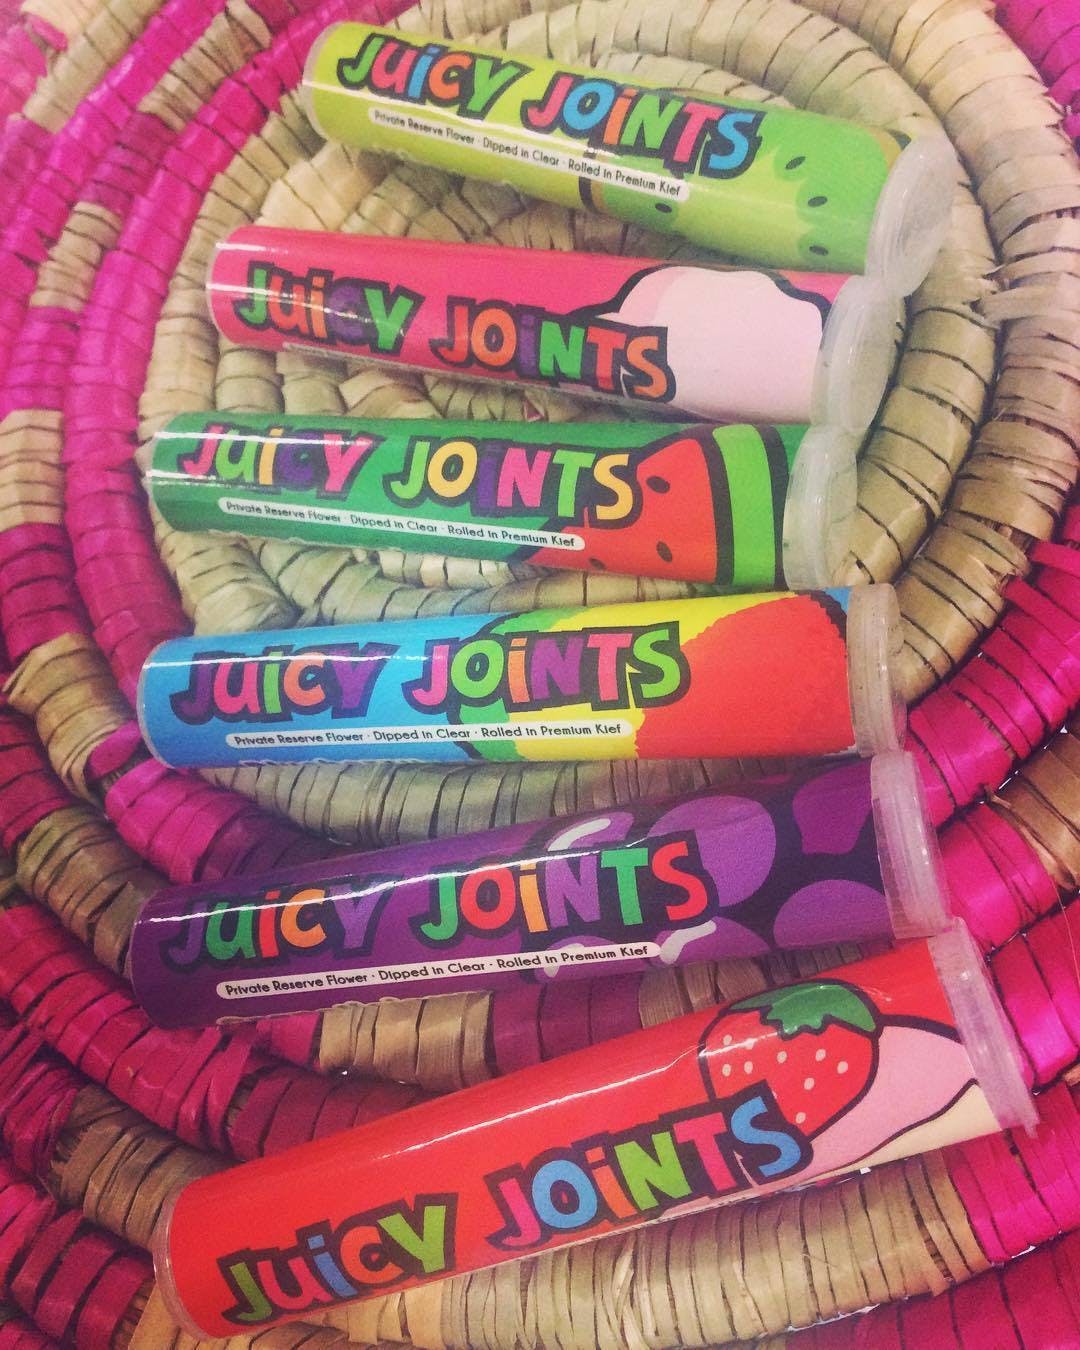 Juicy Joints: Cotton Candy